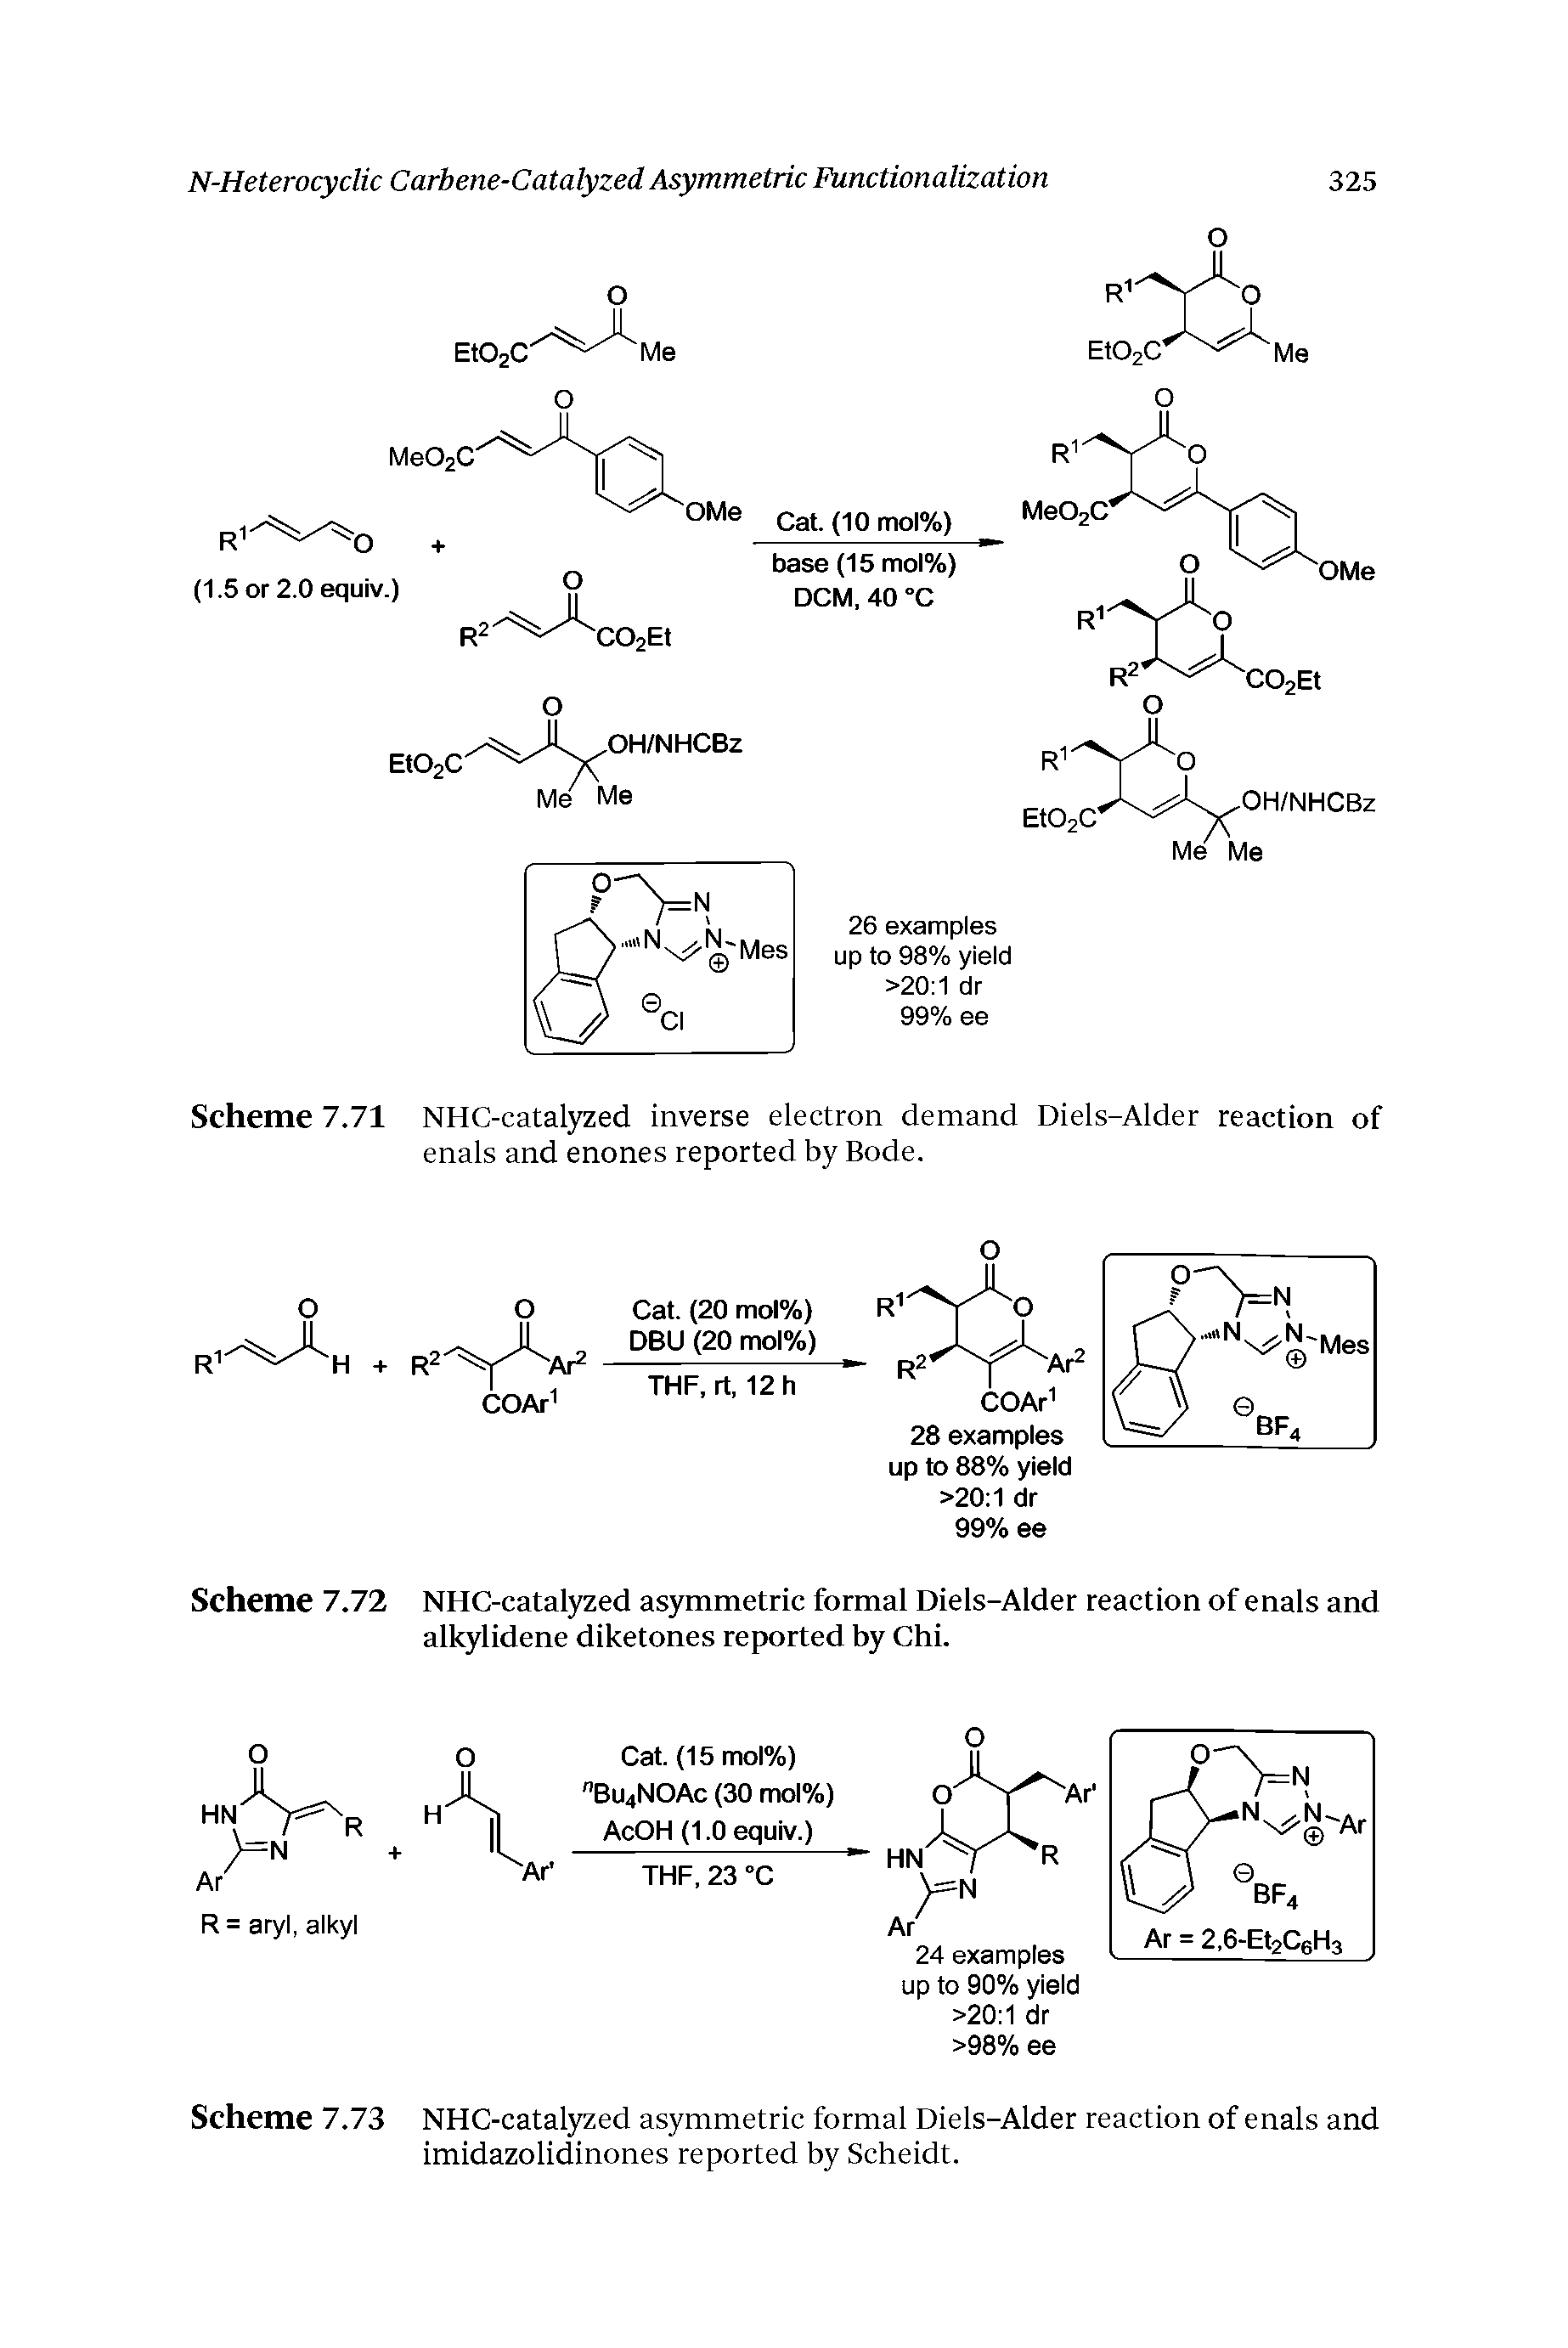 Scheme 7.71 NHC-catalyzed inverse electron demand Diels-Alder reaction of enals and enones reported by Bode.